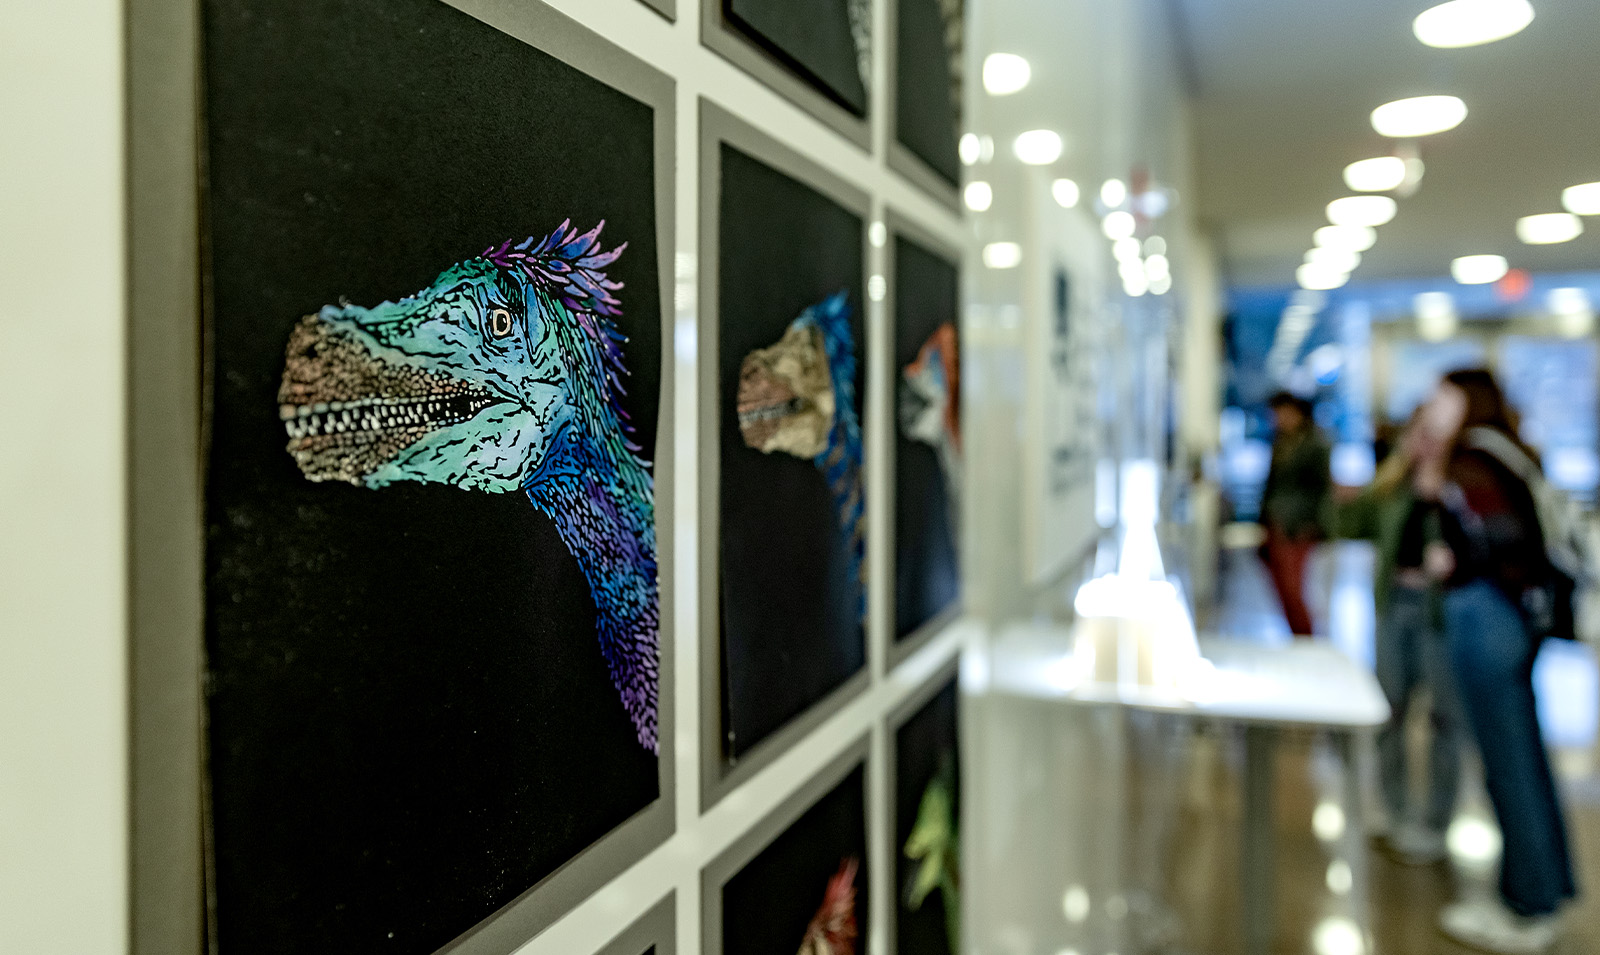 Rows of paintings of dinosaurs in different colors atop black backdrops.